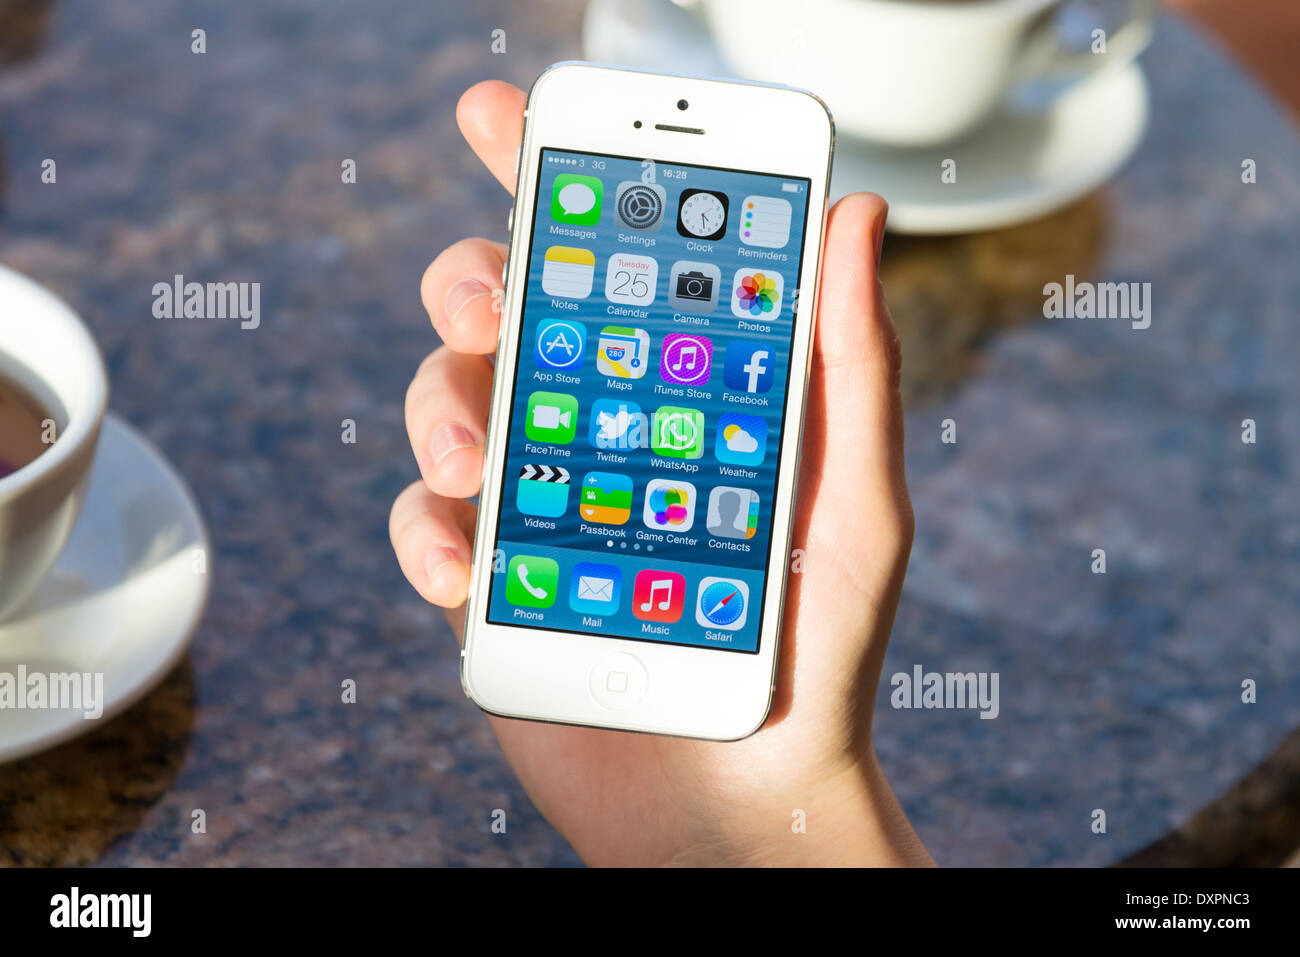 iOS 7 home screen of white Apple iPhone 5 in a cafe Stock Photo